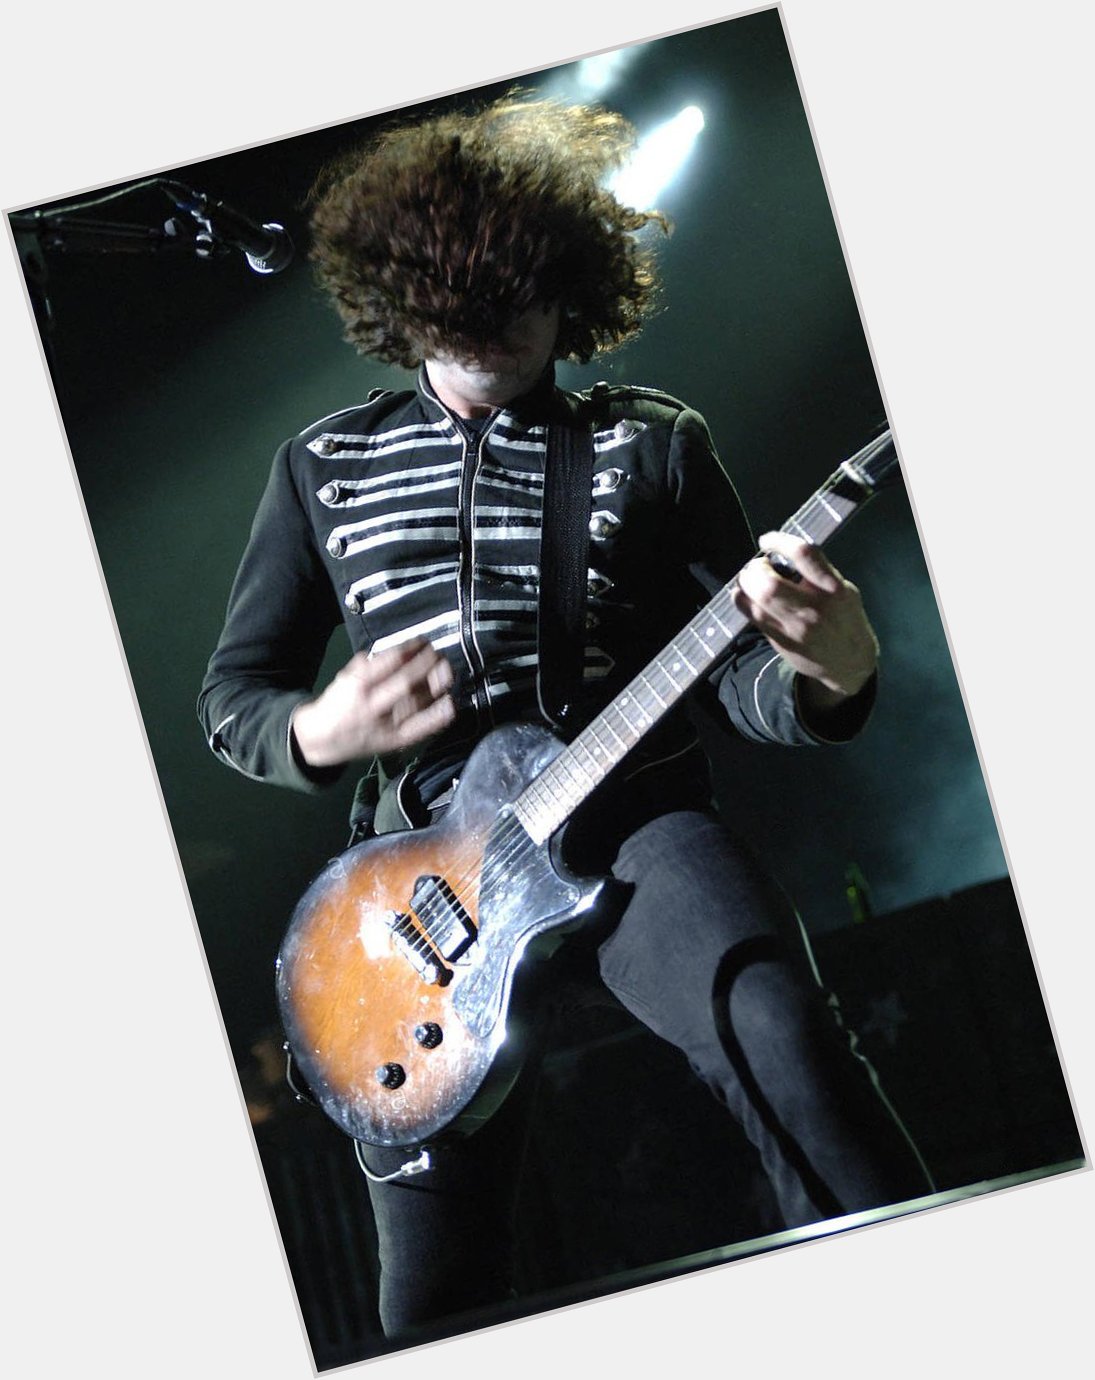 Happy birthday to Ray Toro!
(The only member of mcr) 